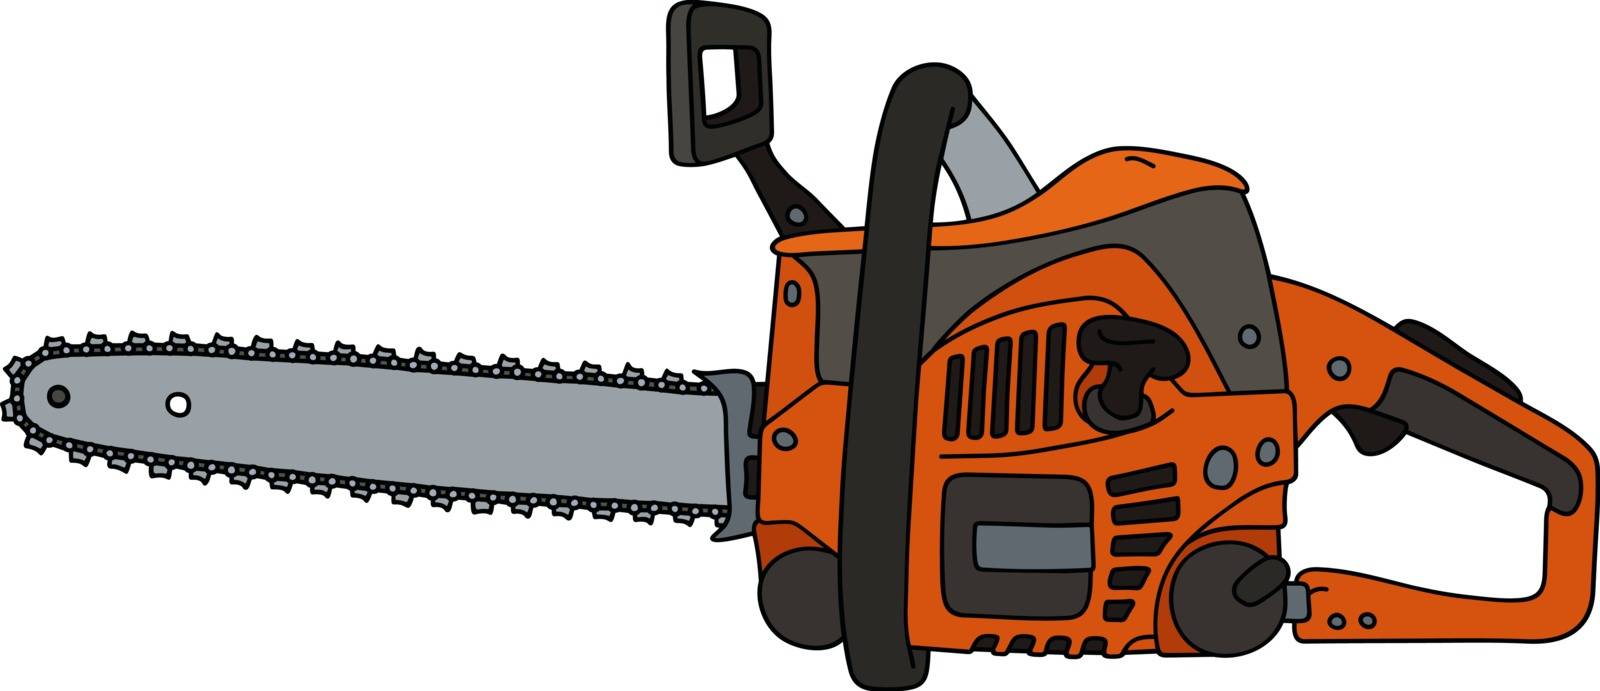 Hand drawing of an orange chainsaw